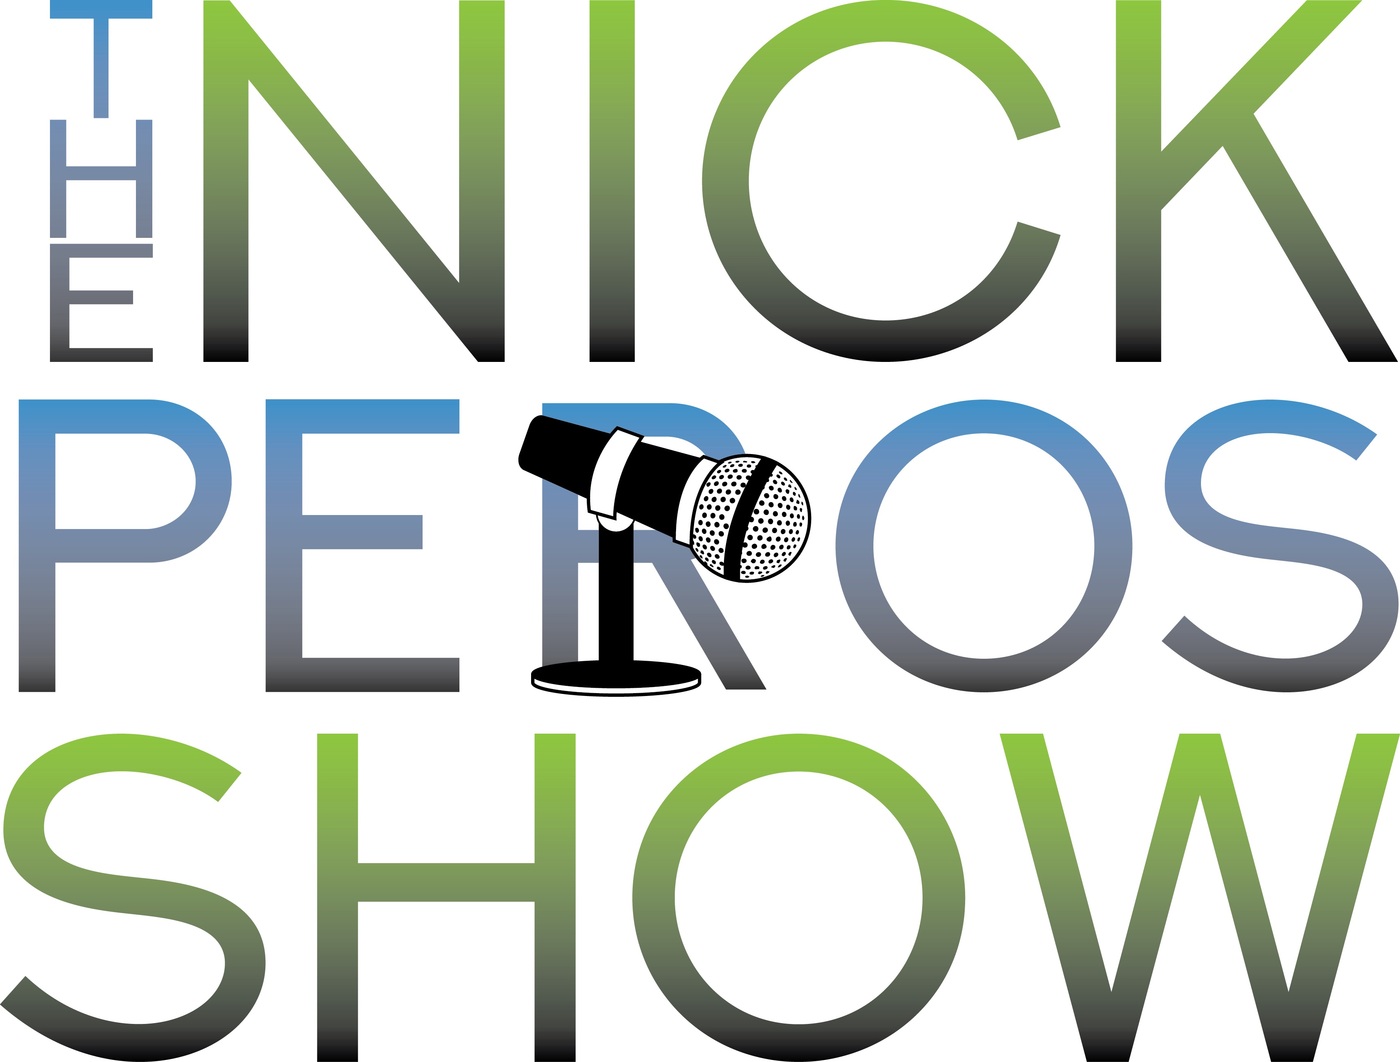 The Nick Peros Show - Episode 27 - Are You Ready For Some Football?!